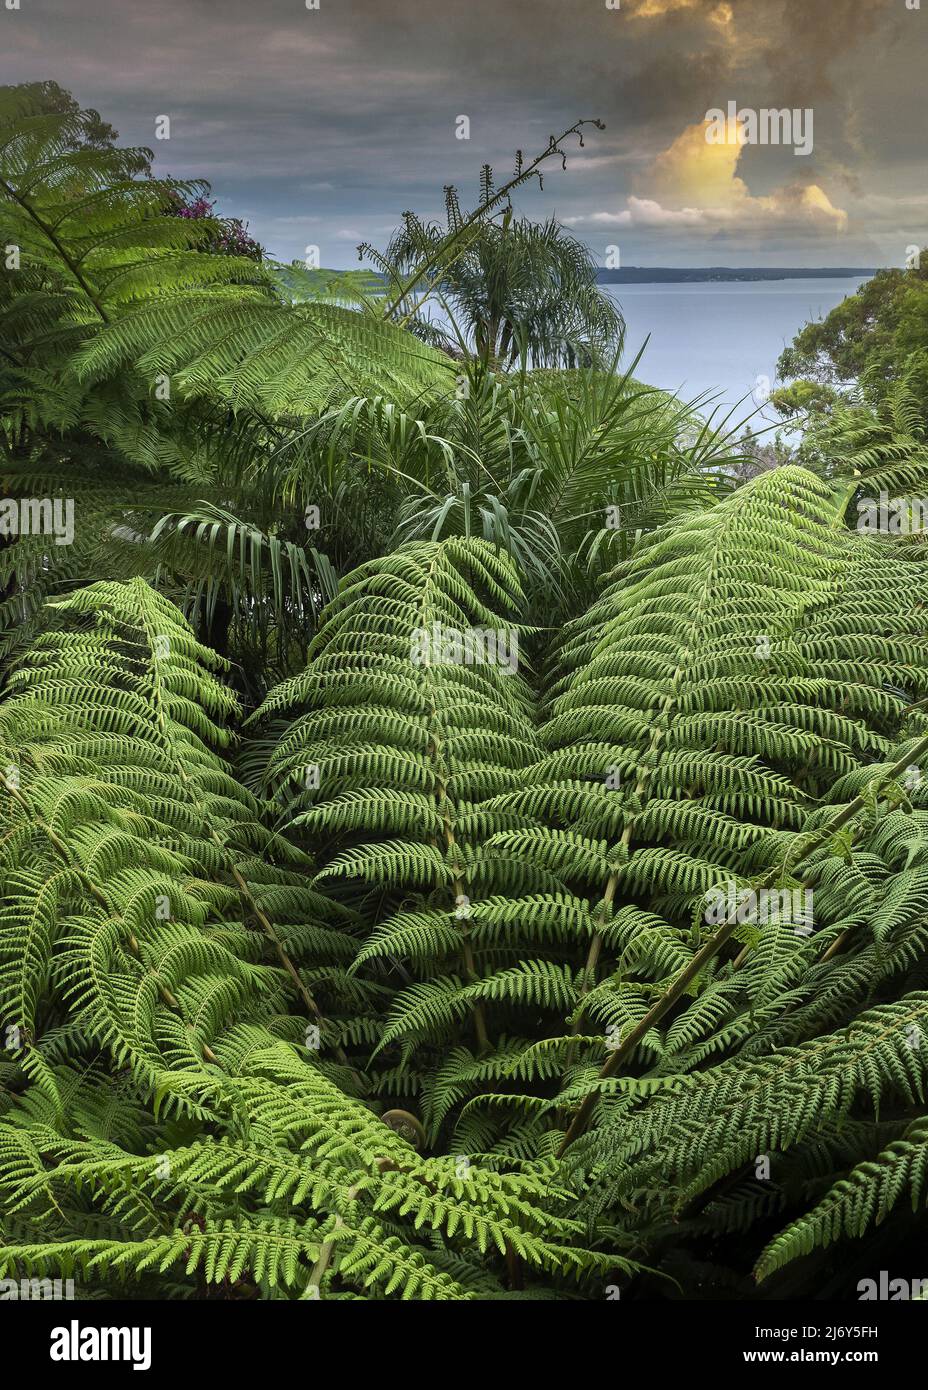 Soft tree fern (Dicksonia Antarctica), growing in a garden, with views to the ocean. New South Wales, Australia Stock Photo